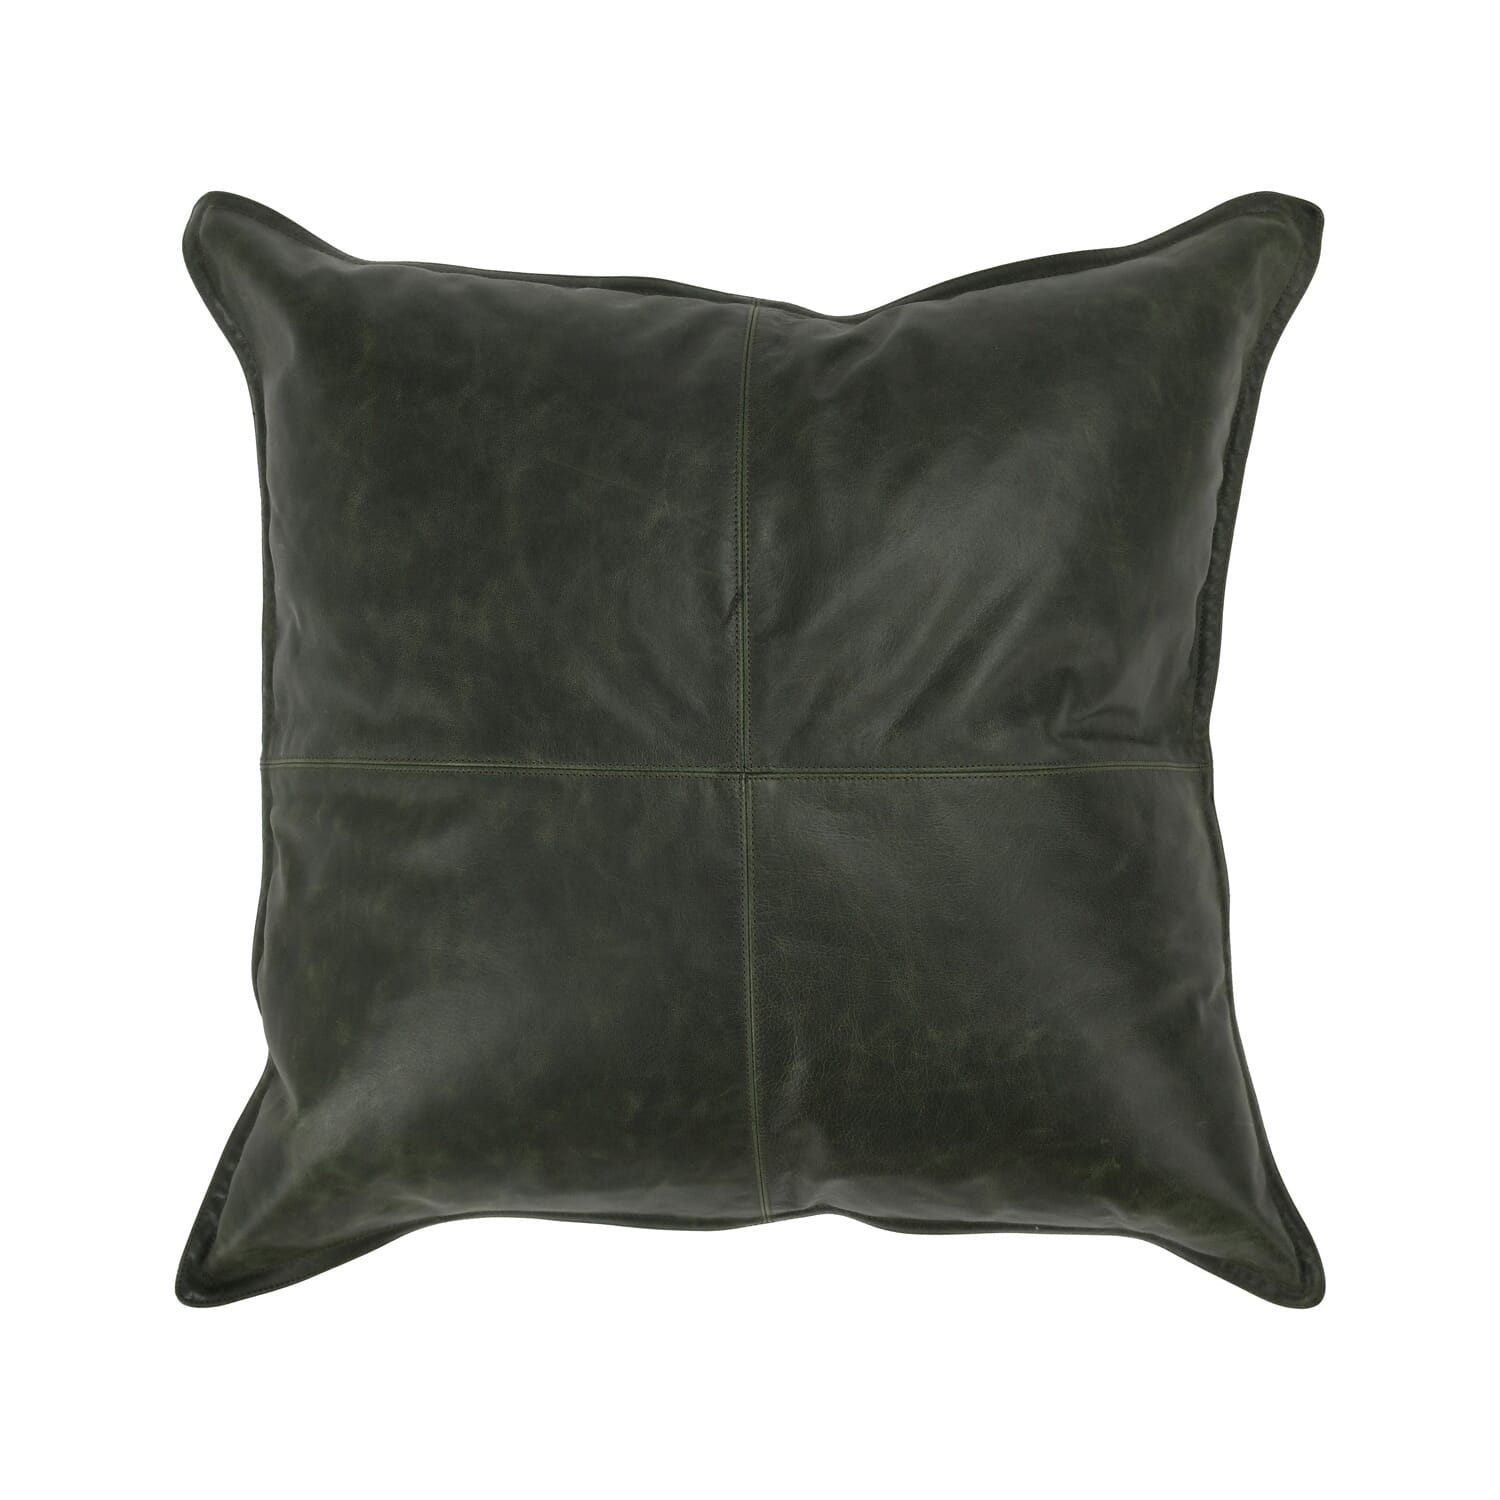 Leather Acre Forest 22x22 Pillow